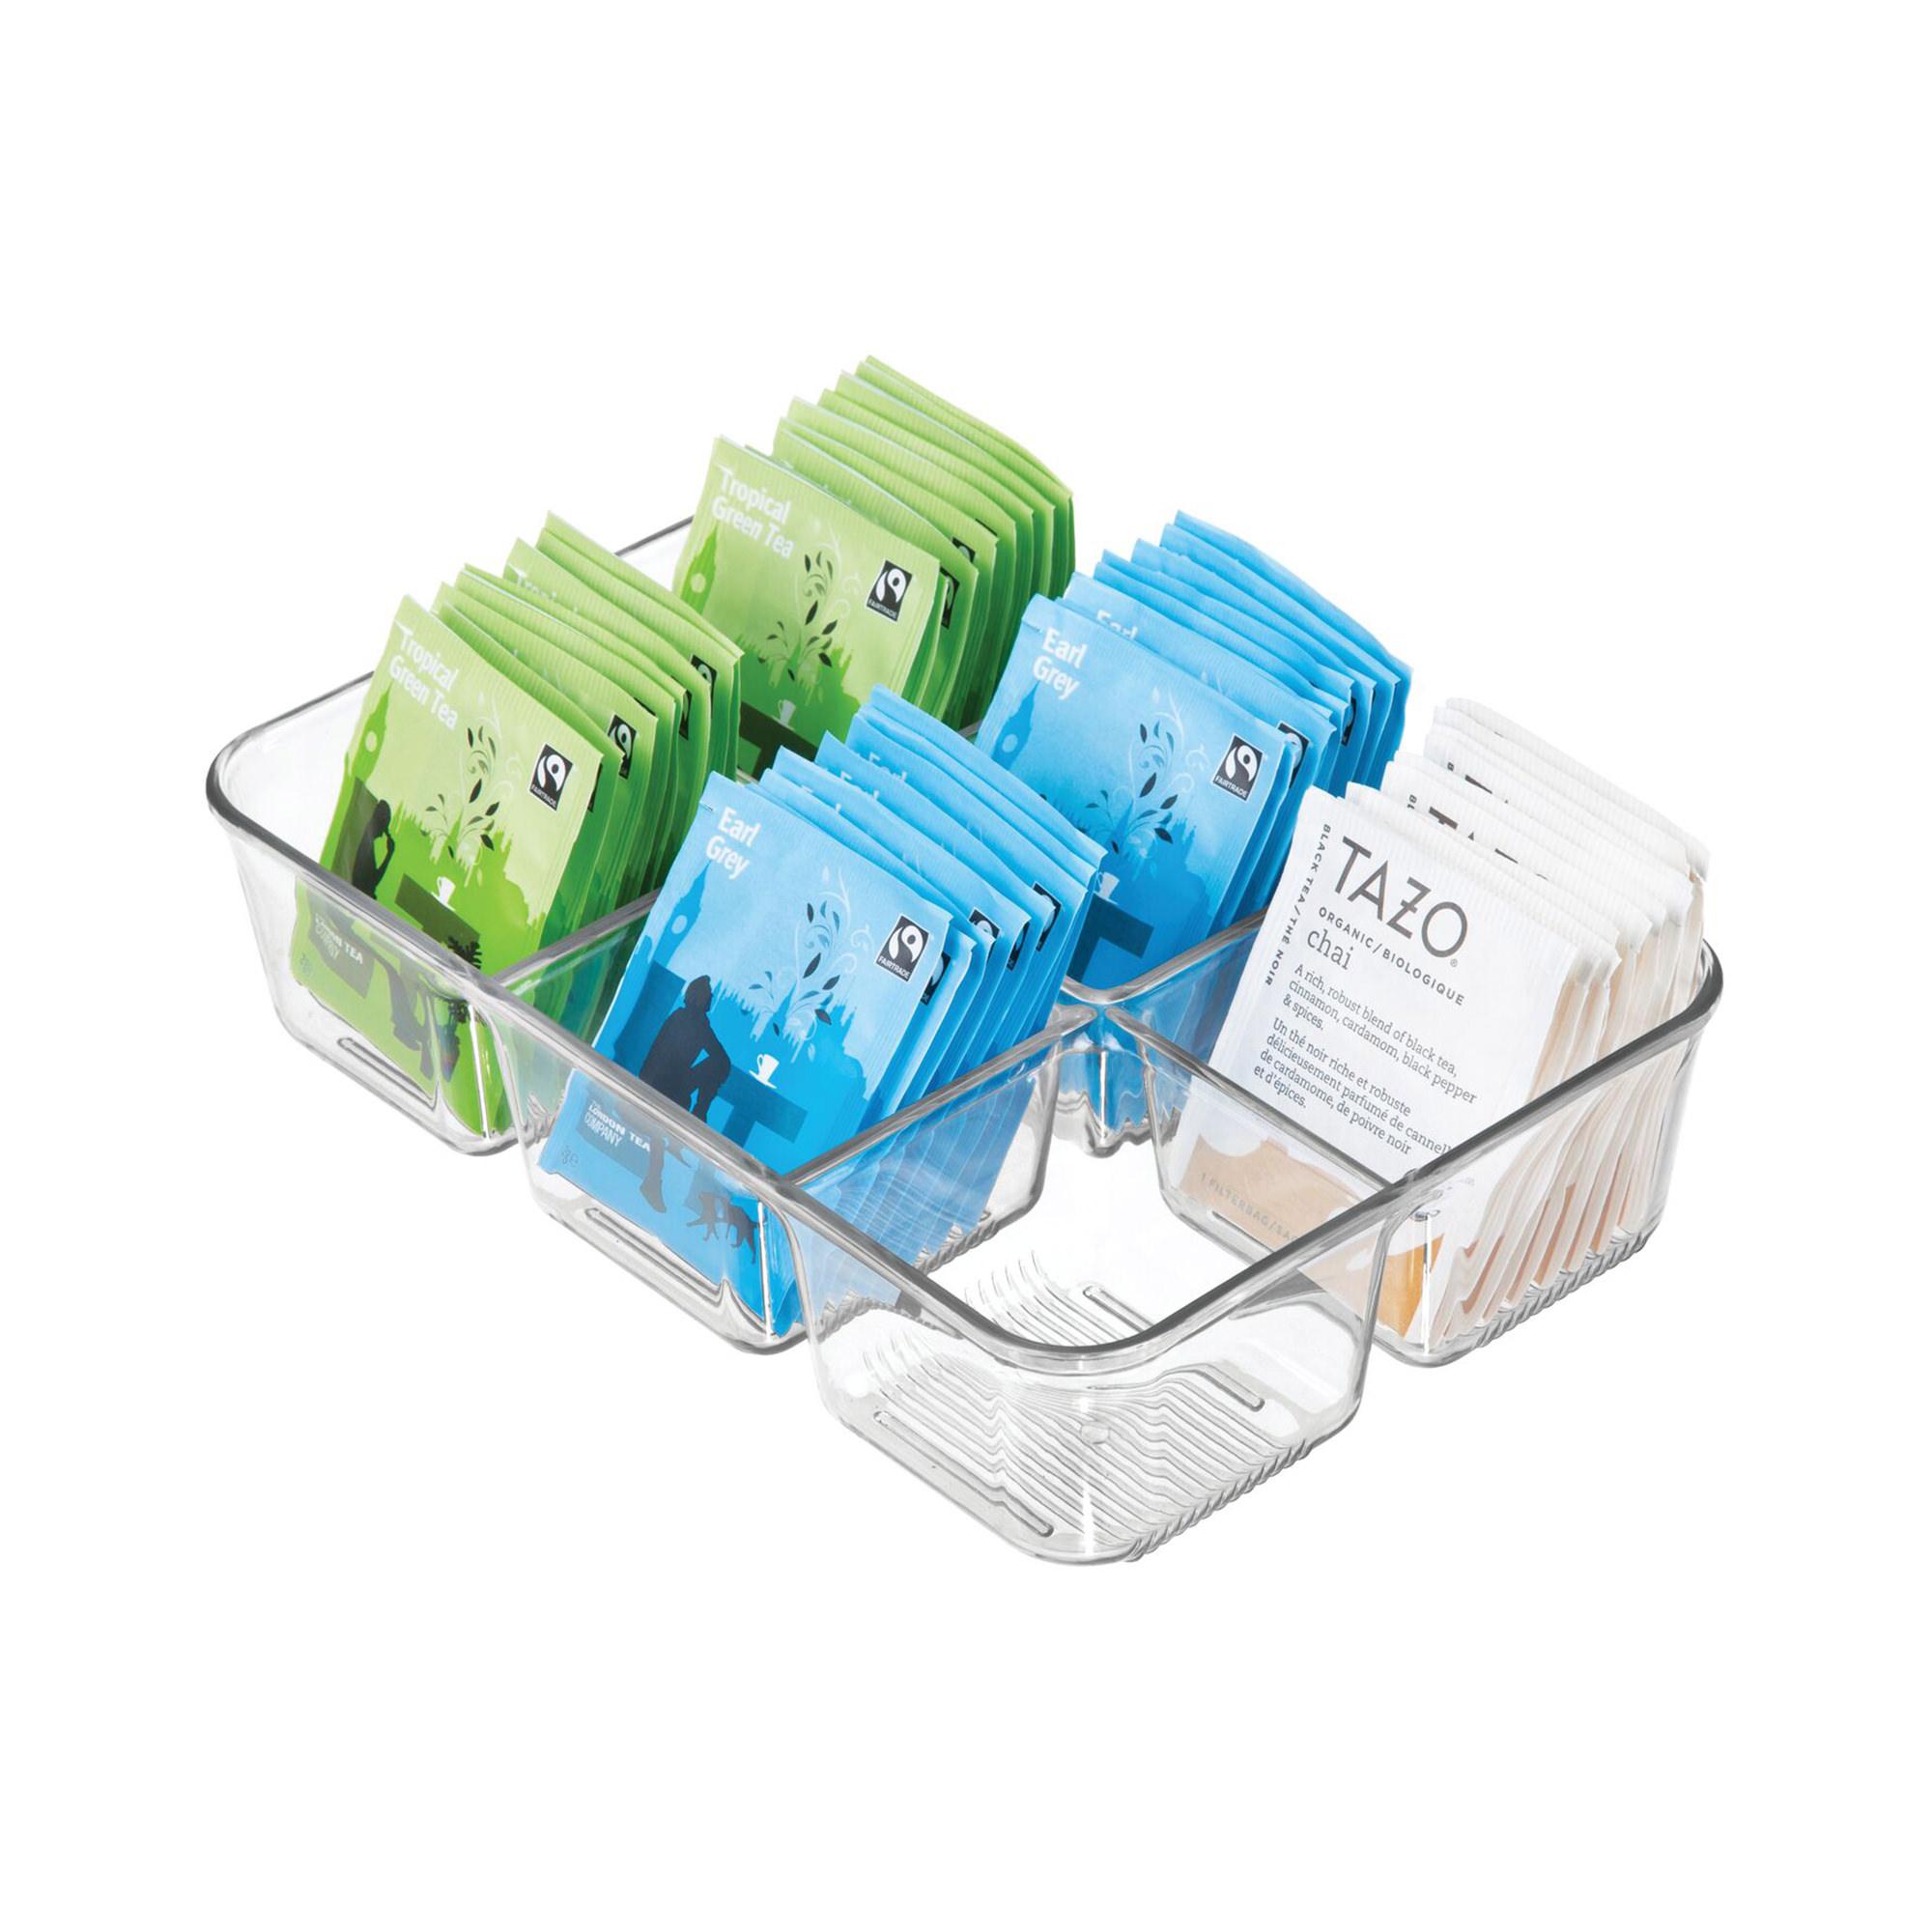 iDesign Linus Pack Organiser 6 Compartment Clear Image 4